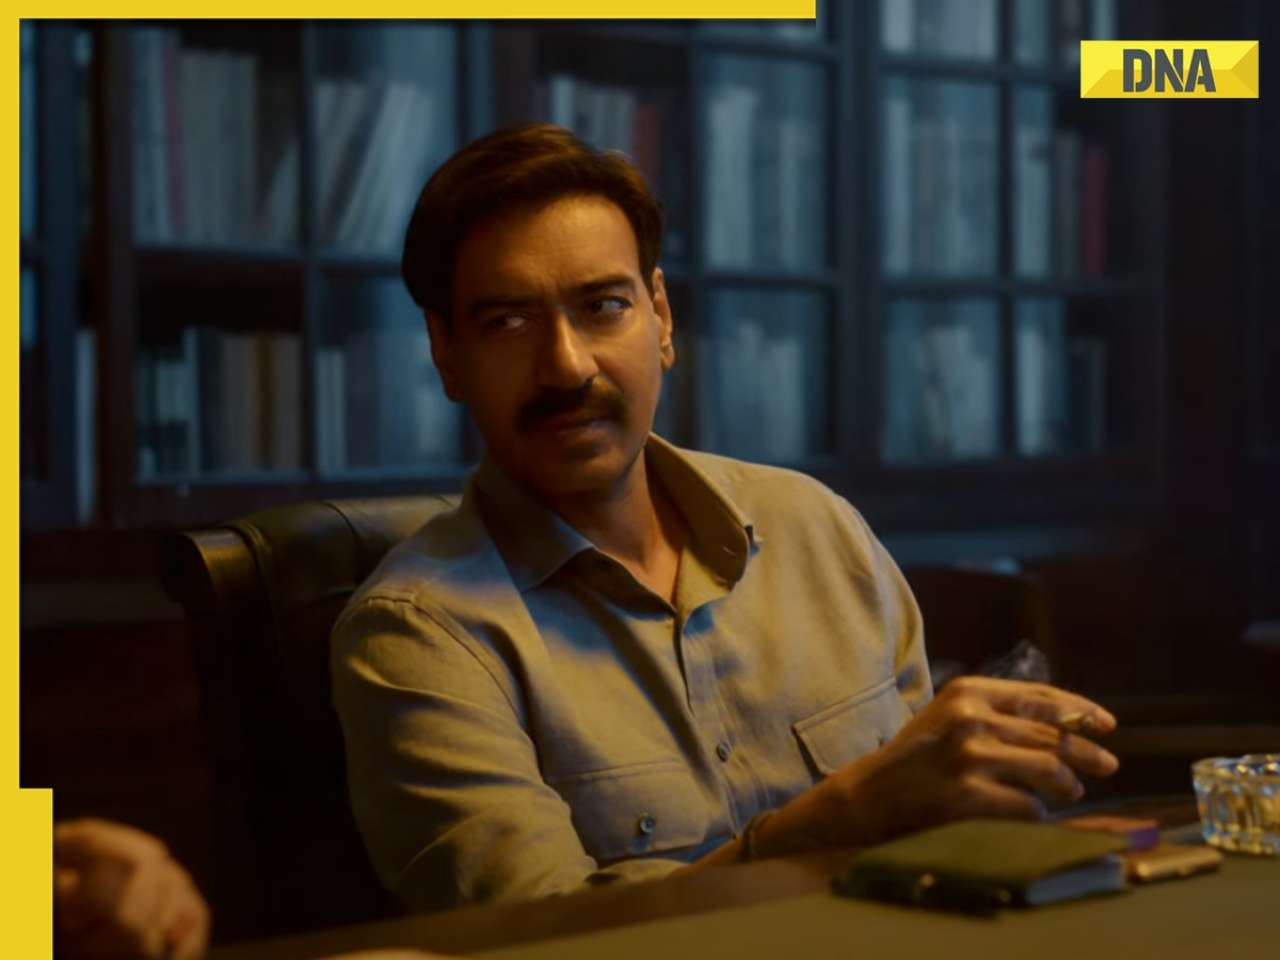 Maidaan final trailer: Ajay Devgn's Syed Abdul Rahim leads Team India against superior opponents, bloodthirsty mob